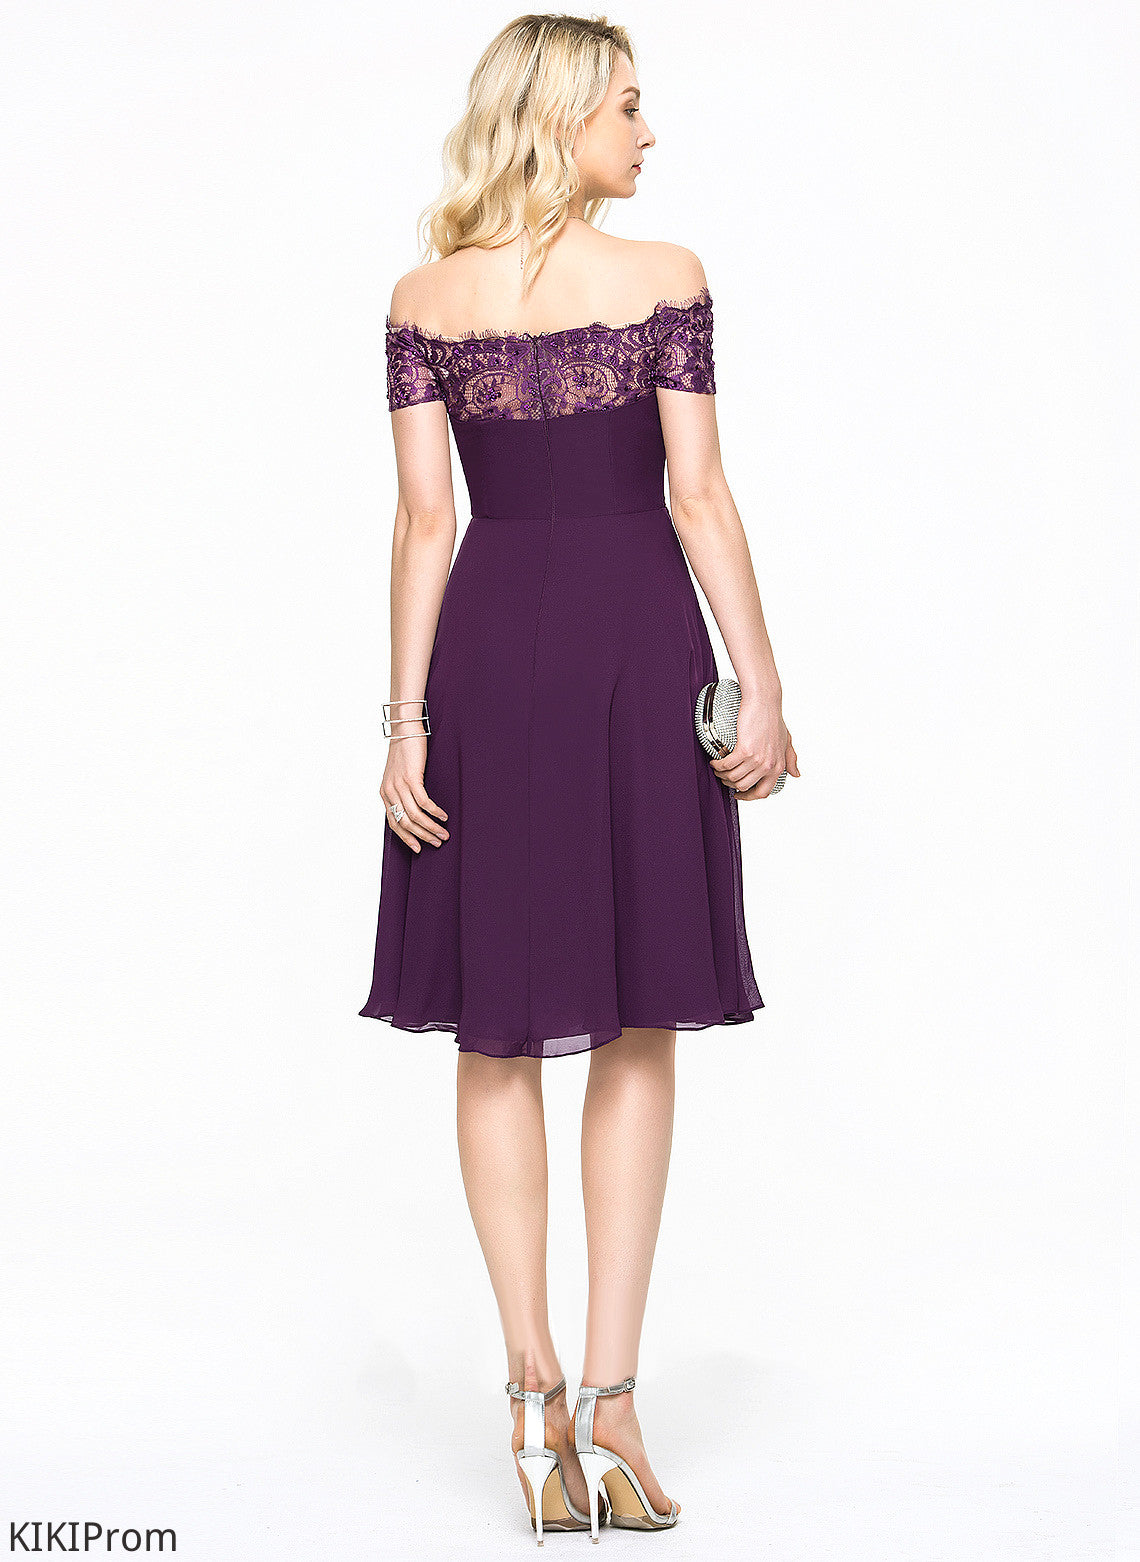 Dress Homecoming Dresses Fiona Chiffon A-Line Beading Off-the-Shoulder Lace Homecoming With Knee-Length